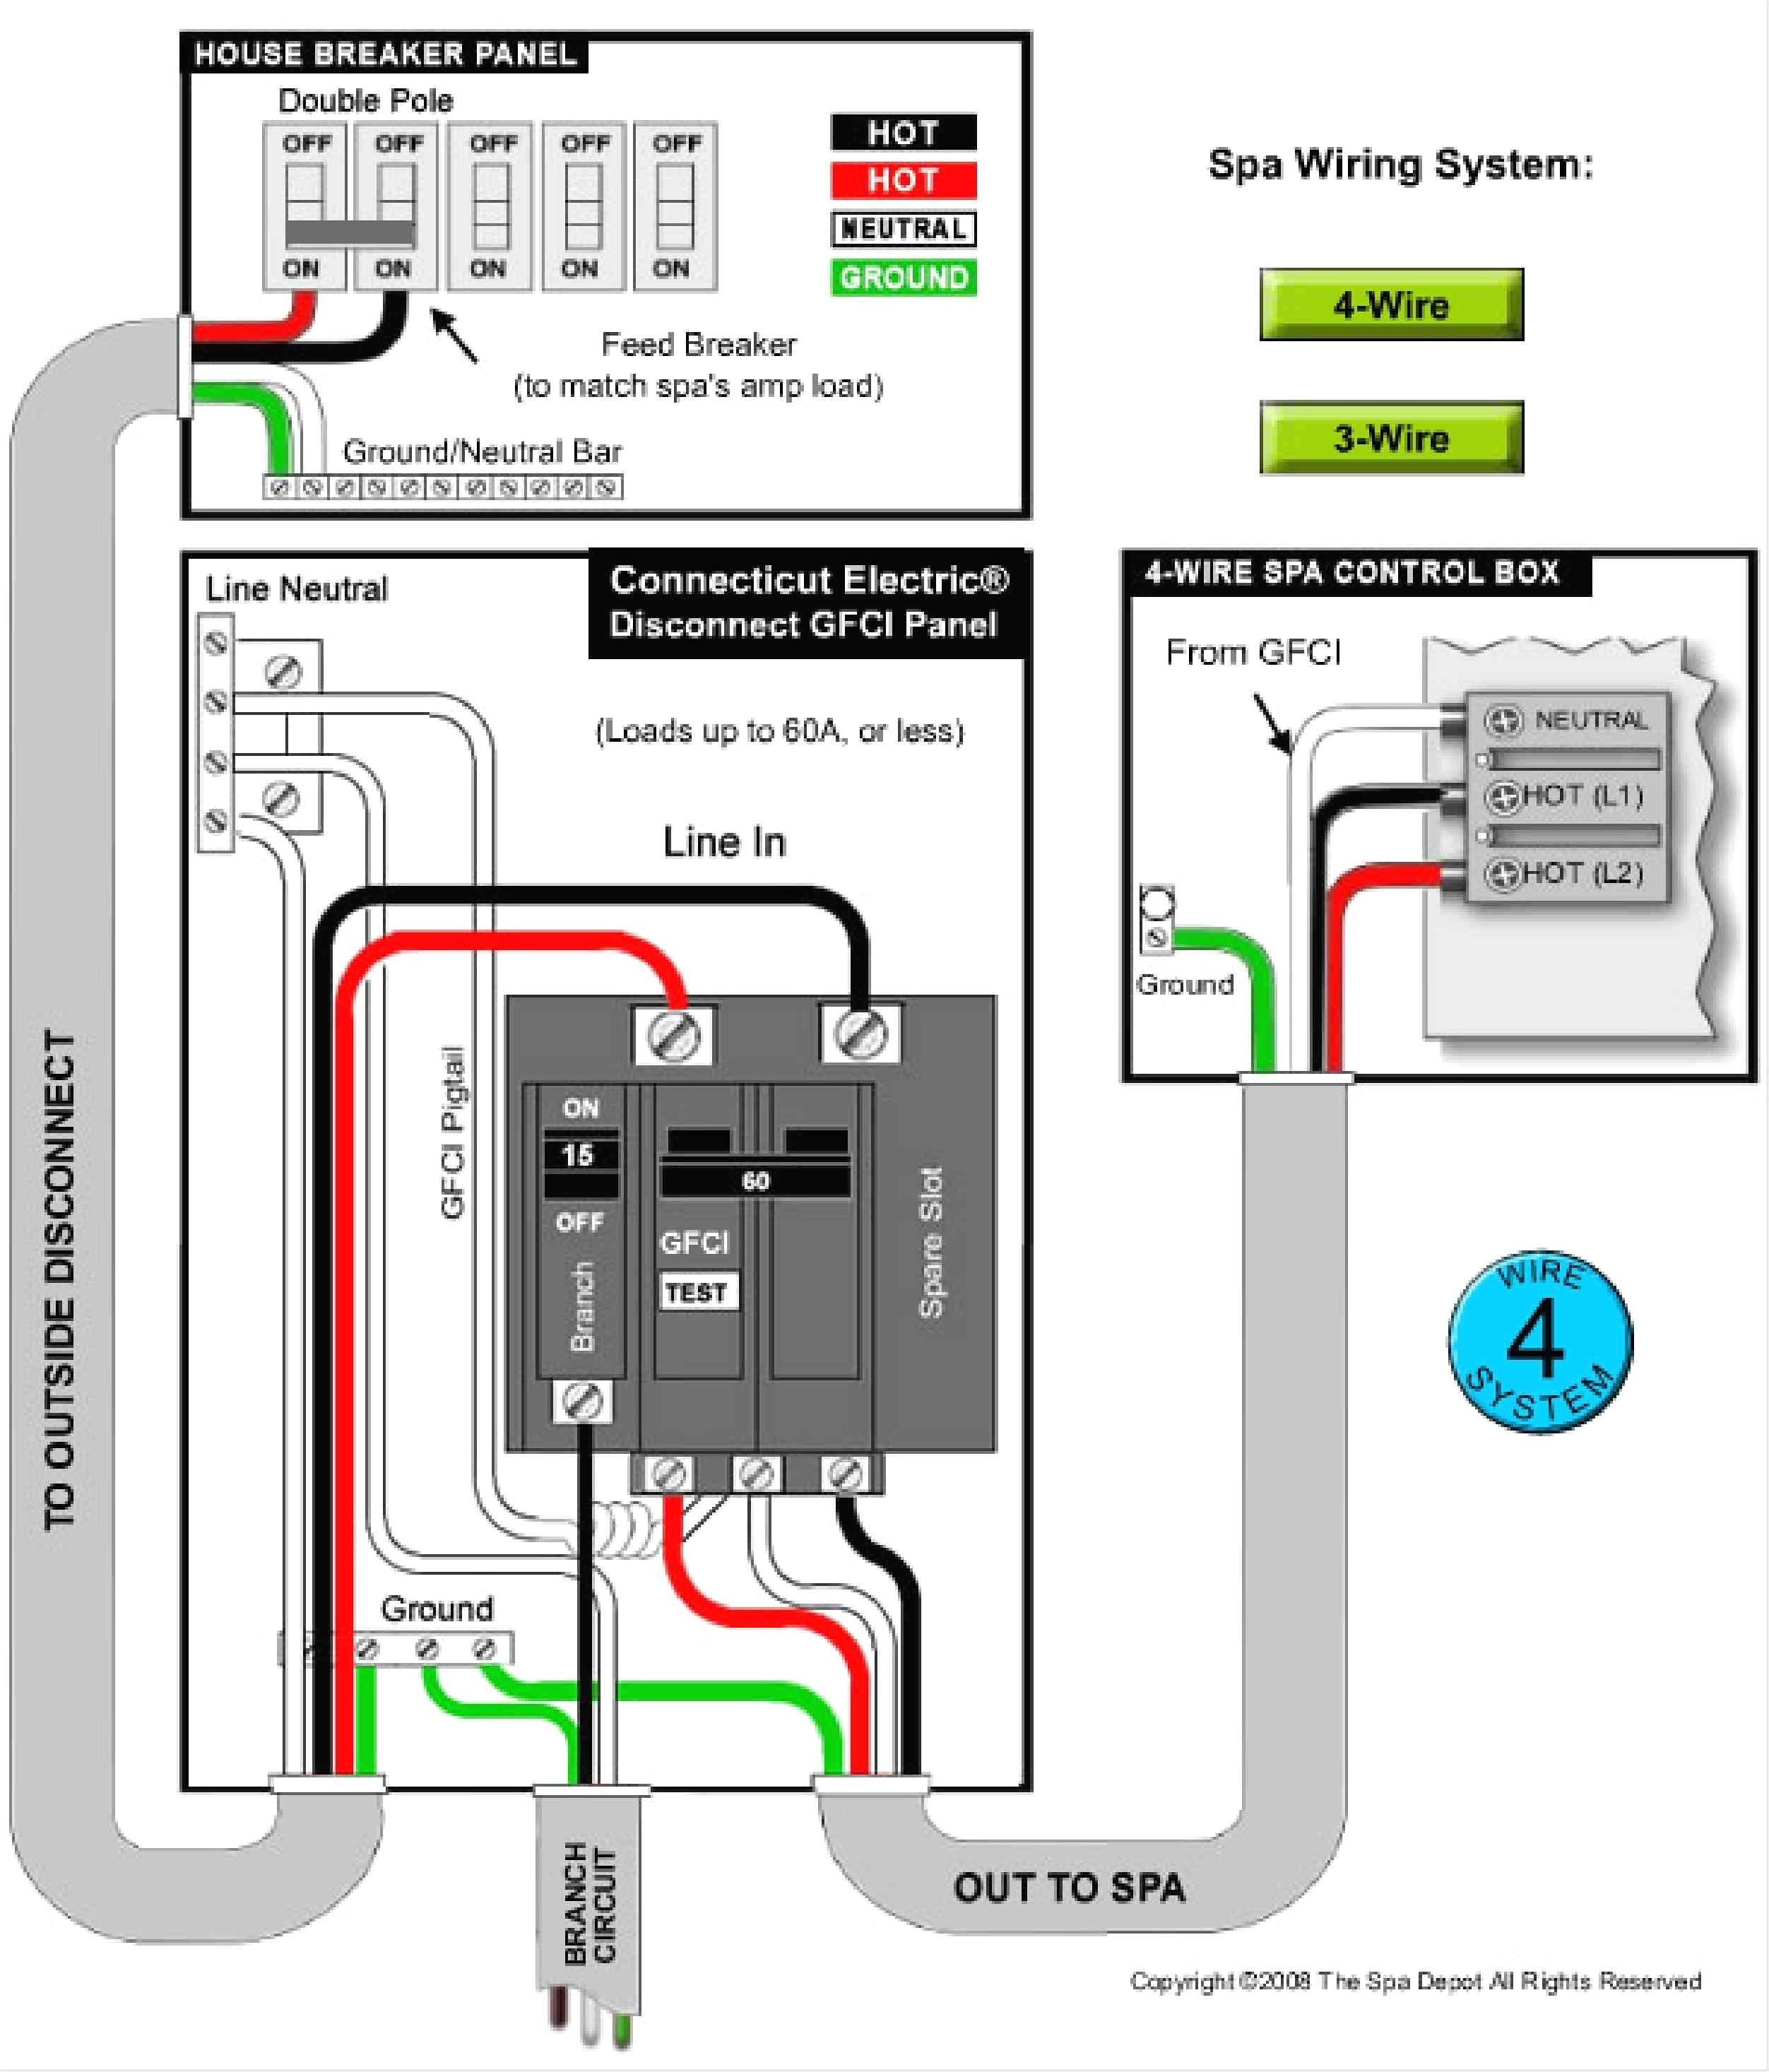 50 Amp Wiring Diagram Best 50 Amp Sub Panel Wiring Diagram Collection